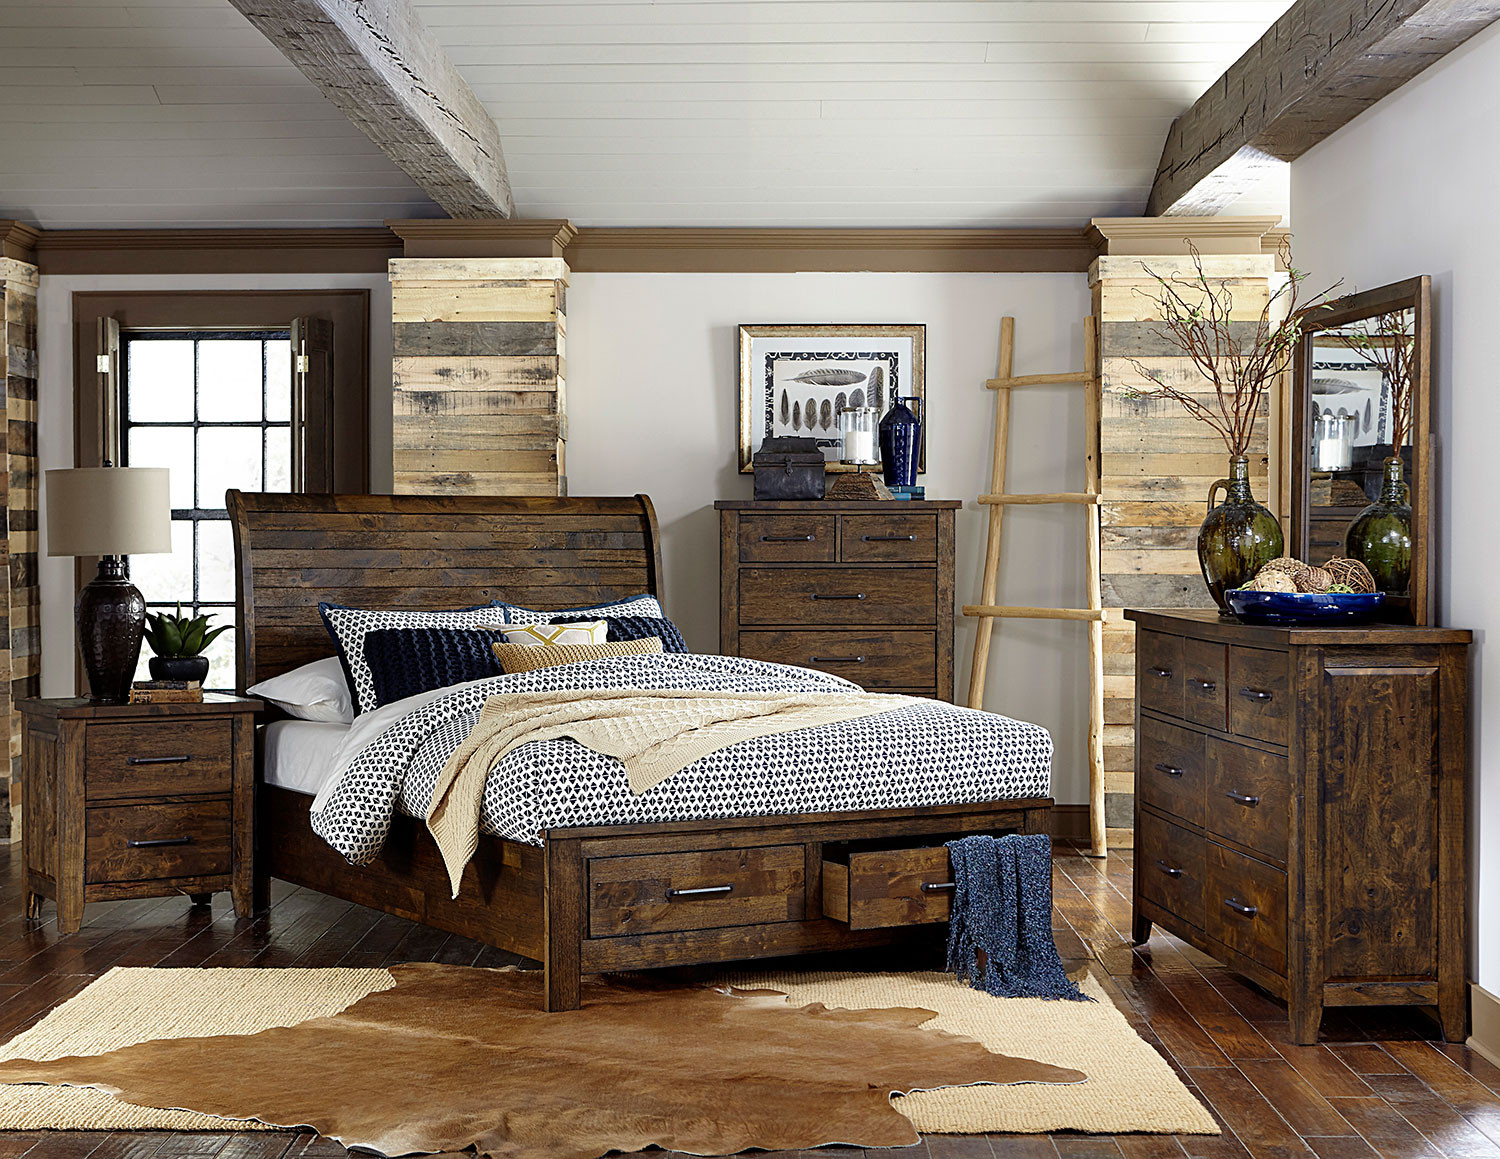 Antique-Inspired Rustic Charm